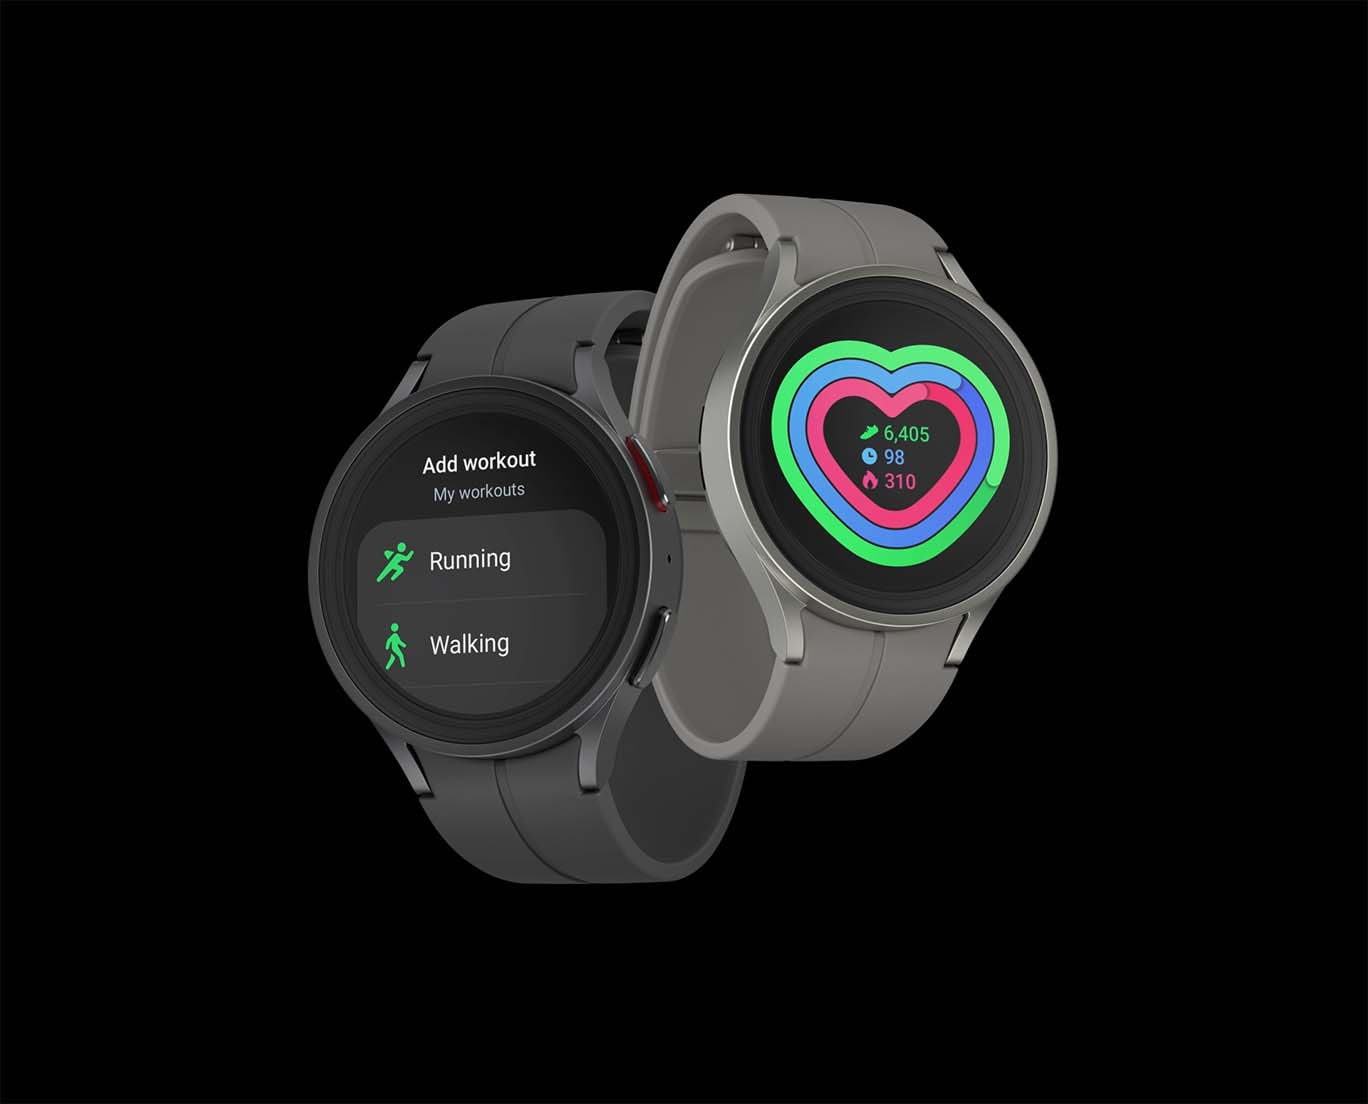 Two Galaxy Watch5 Pro interlocked with each other. The black Watch5 Pro on the left is displaying the 'My workout' interface on the watch face, while the gray Watch5 Pro on the right displays a heart monitor on the watch face.